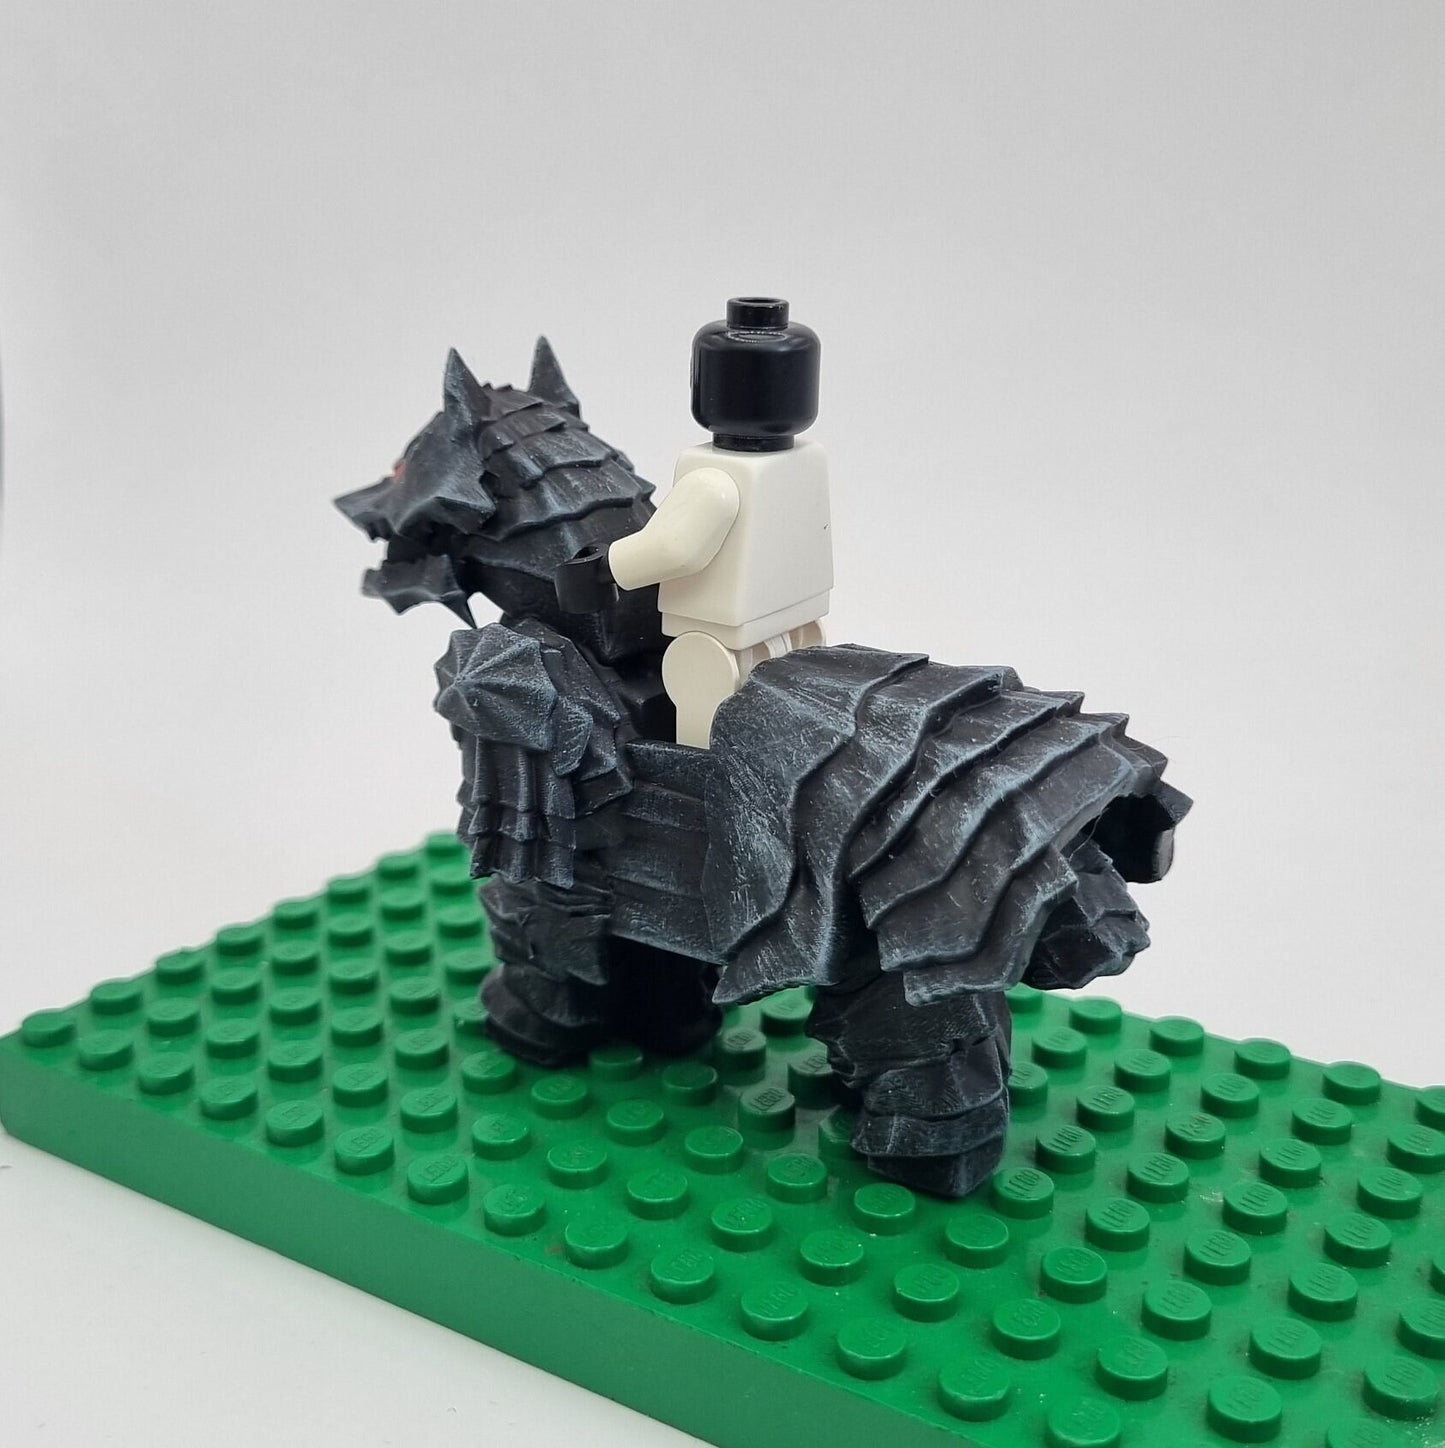 Building toy custom 3D printed painted armored horse!